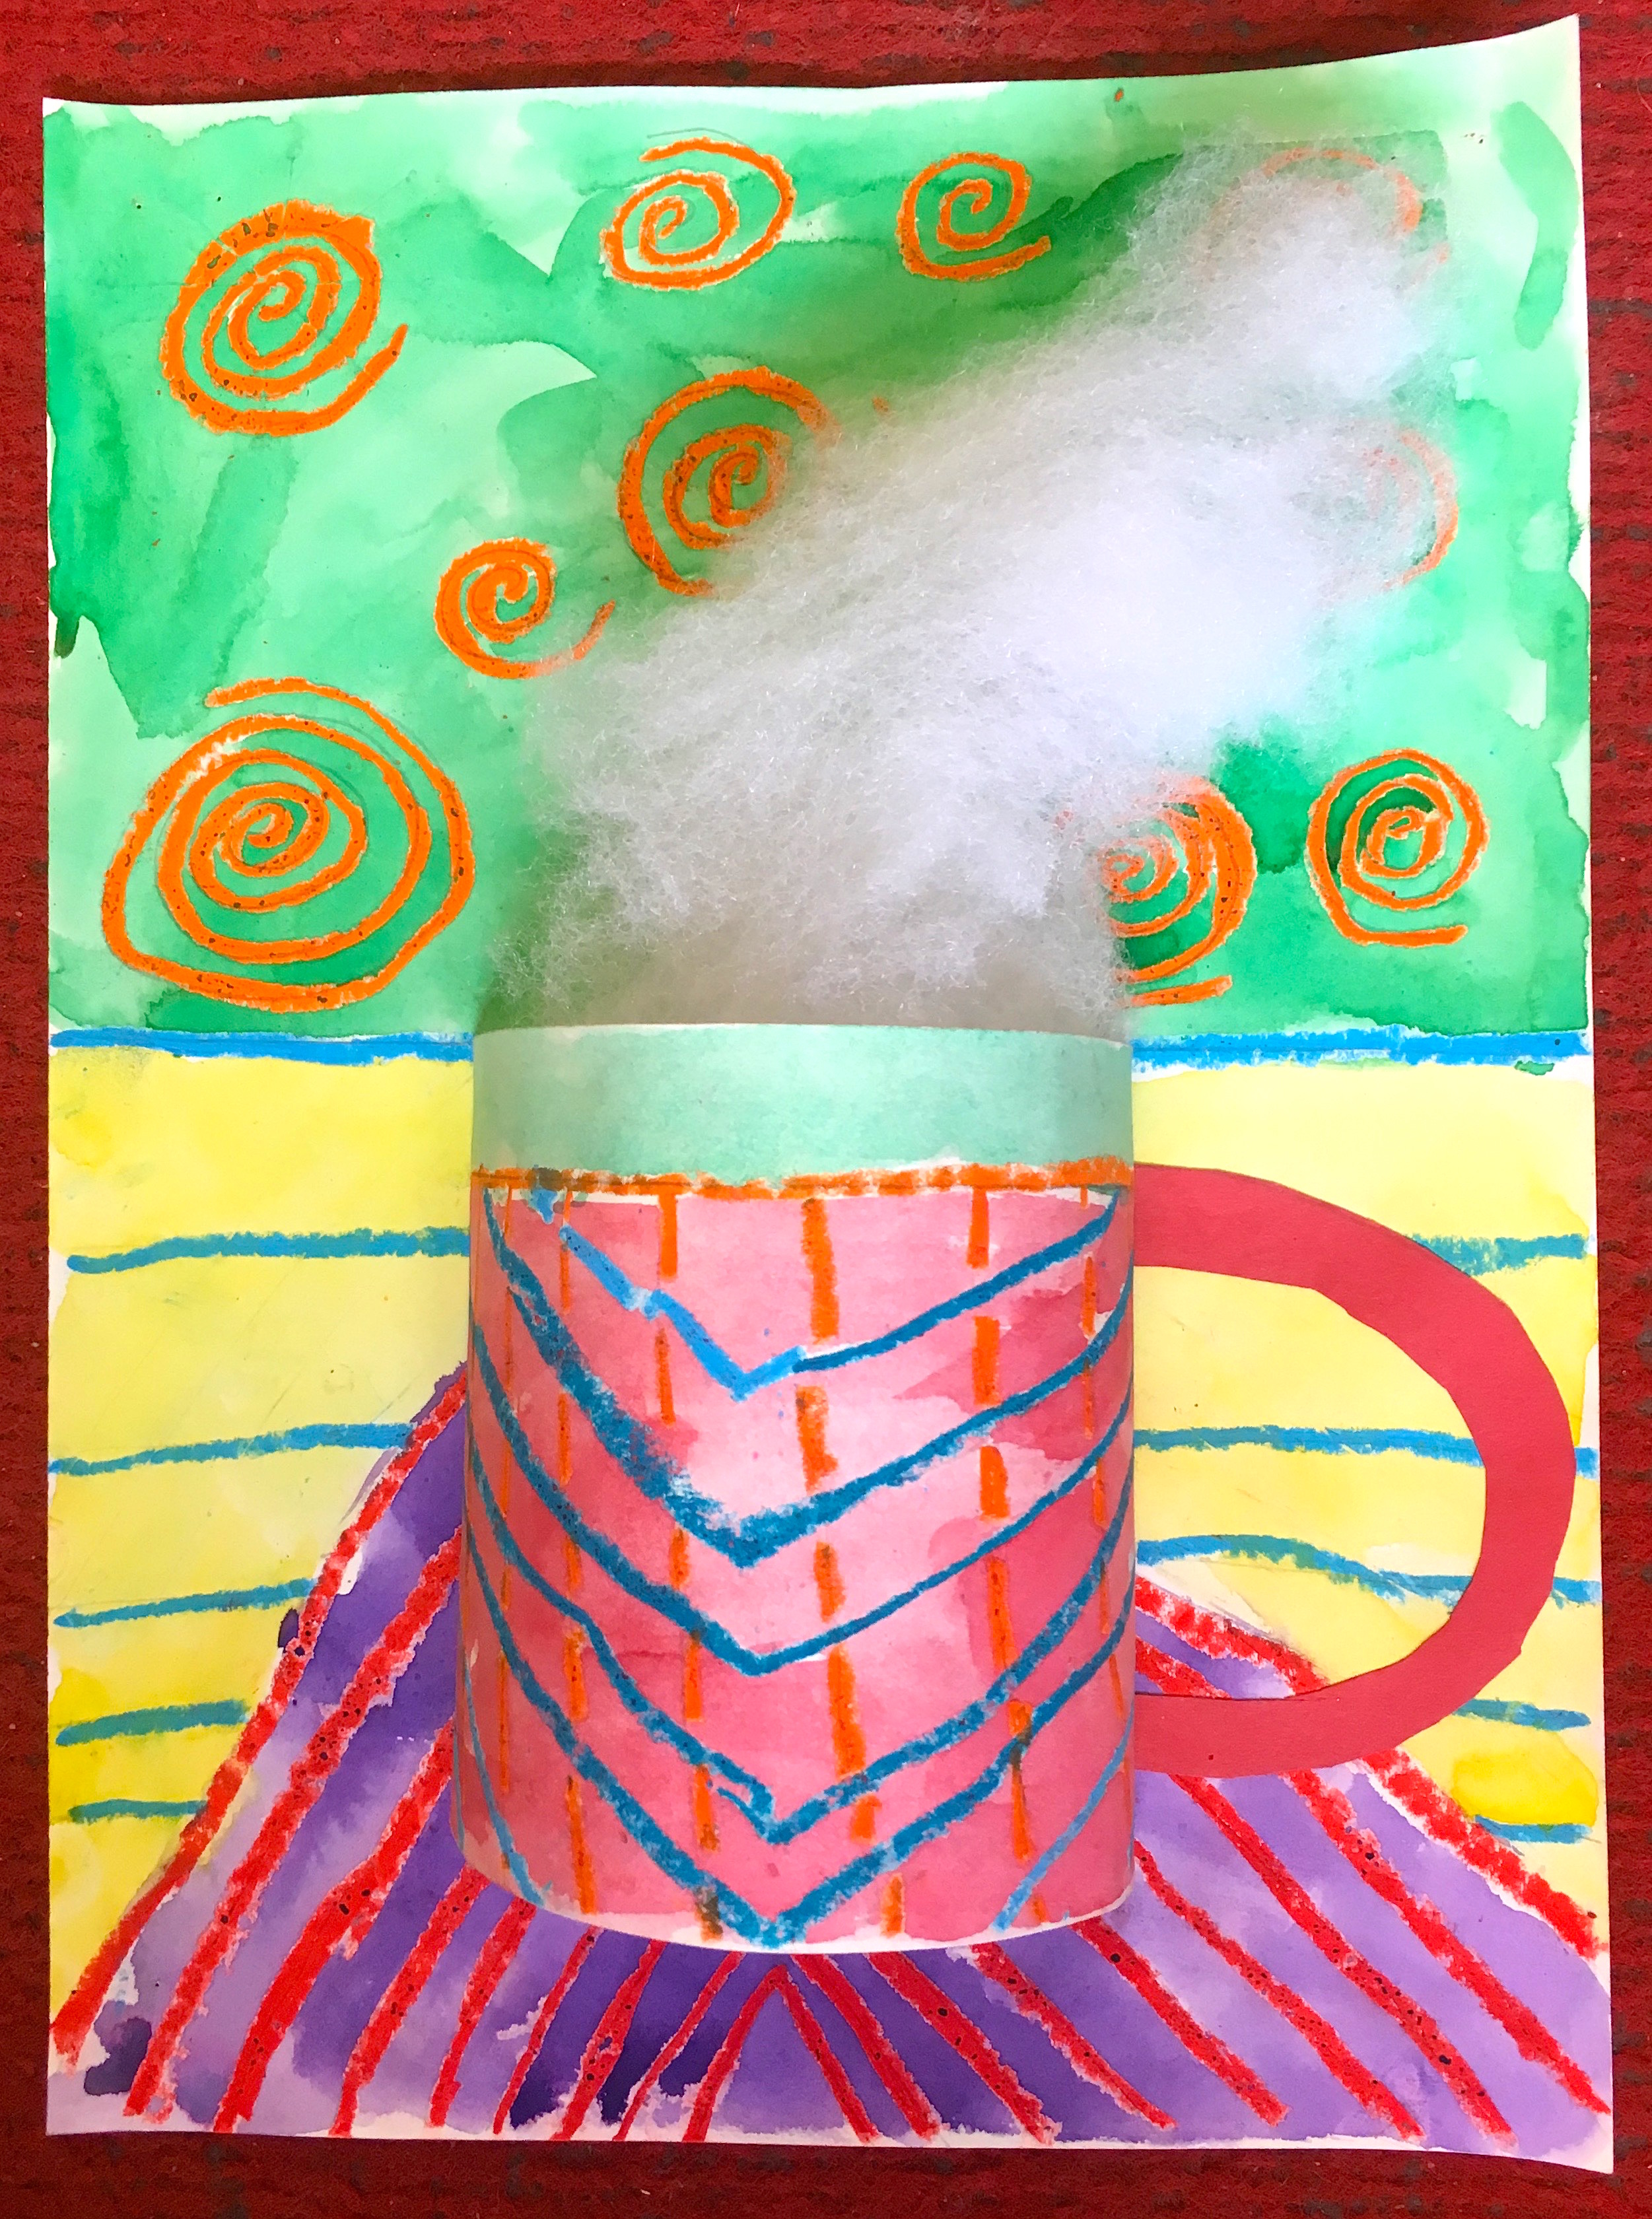 Creating Oil Pastel Self-Portraits with Kids - Keeping Life Creative